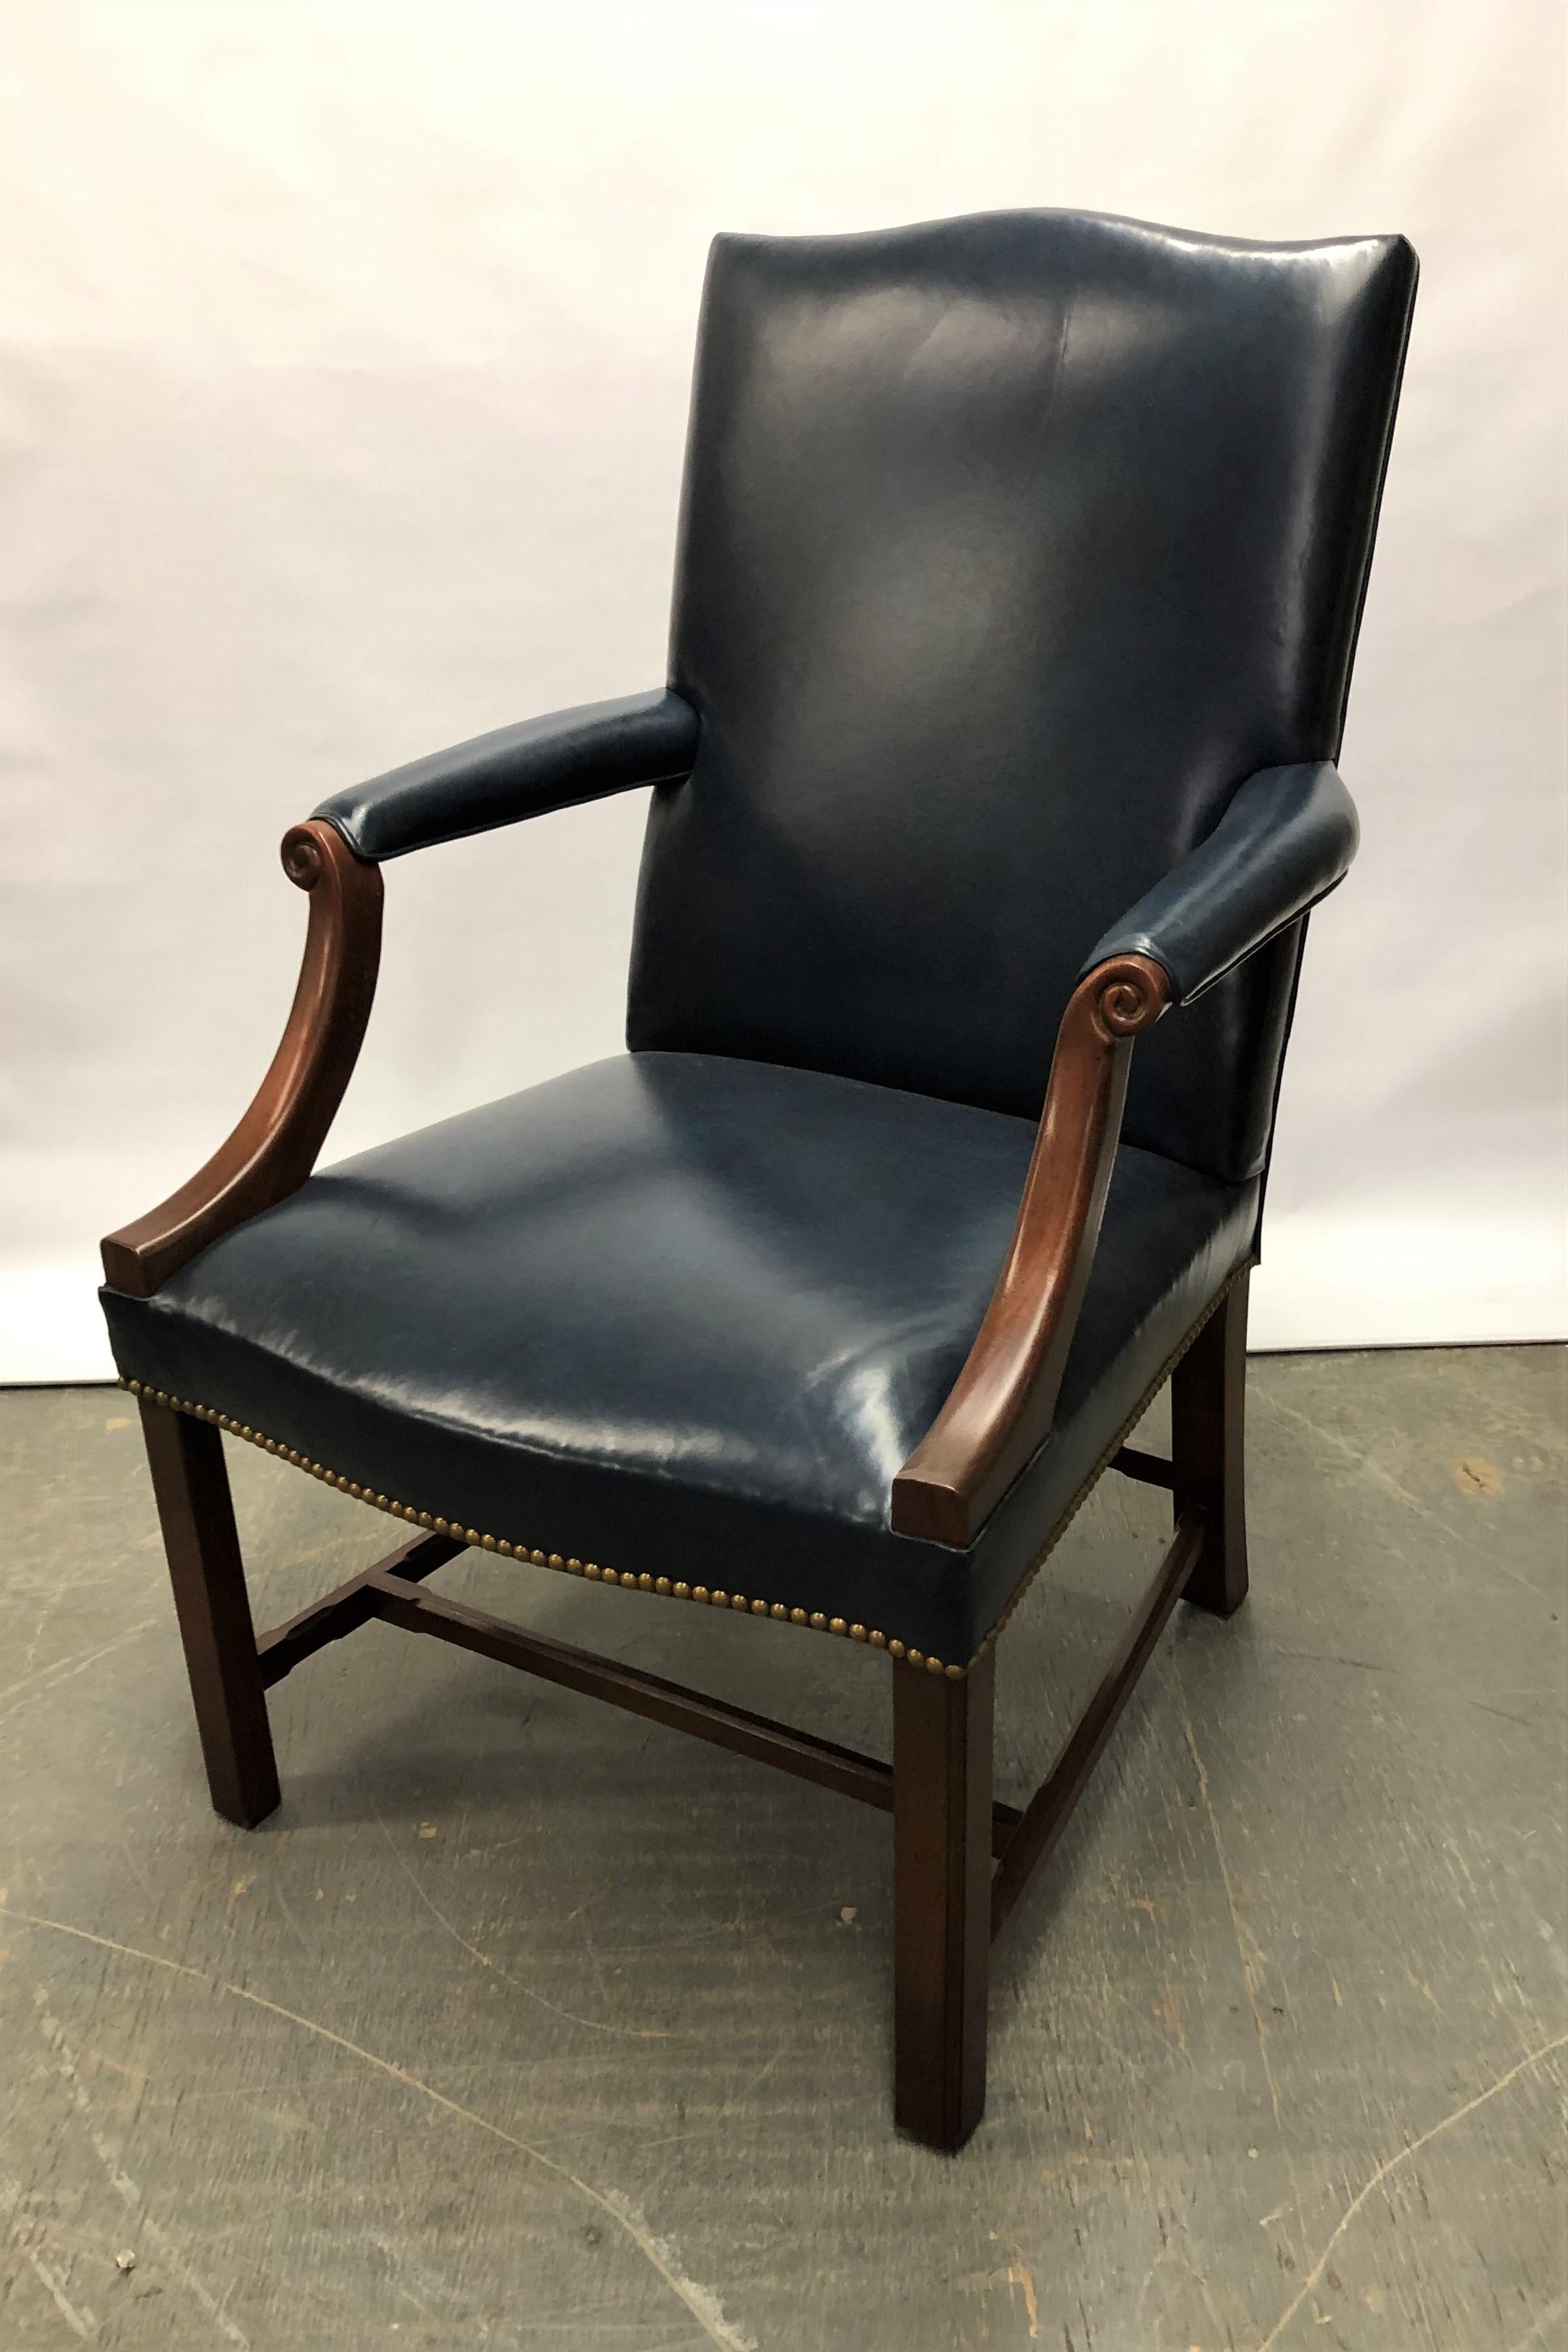 This handsome Chippendale style Mahogany Gainsborough chair sits comfortably in the office, den, library or living room. The serpentine shaped top and seat front, along with, the uncommon chamfered stretcher add to its distinction. This important